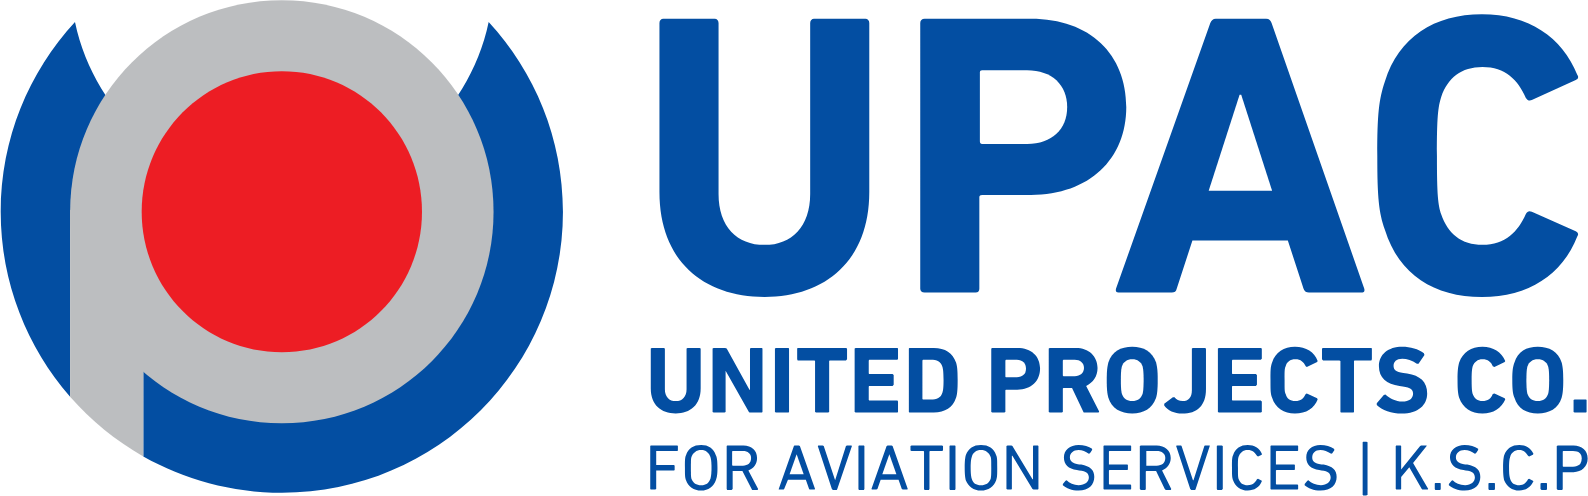 United Projects Company For Aviation Services logo large (transparent PNG)